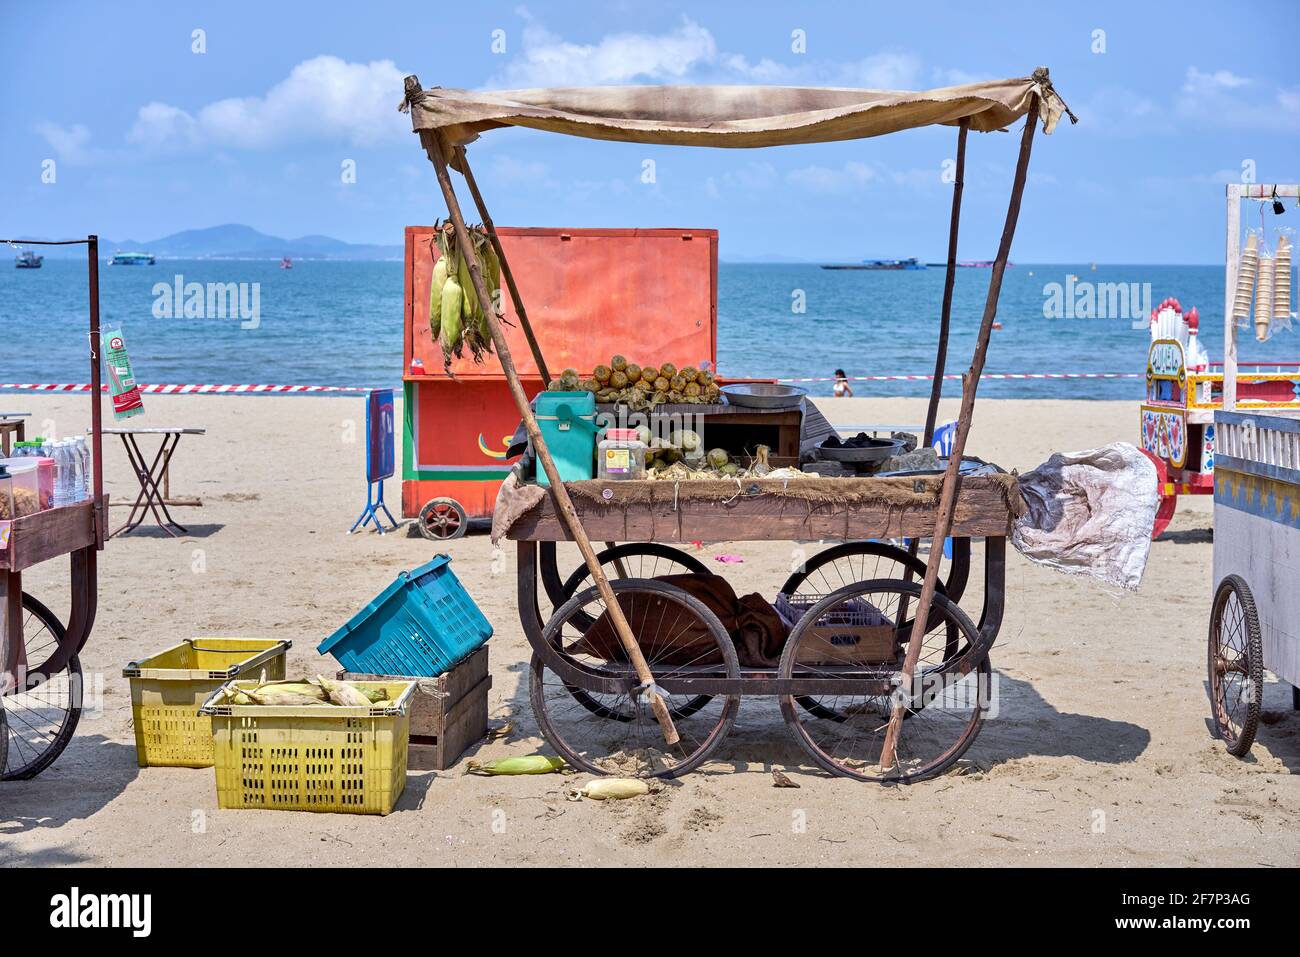 Vintage food carts lining up on the beach as a novelty attraction. Pattaya, Thailand, Southeast Asia. Stock Photo